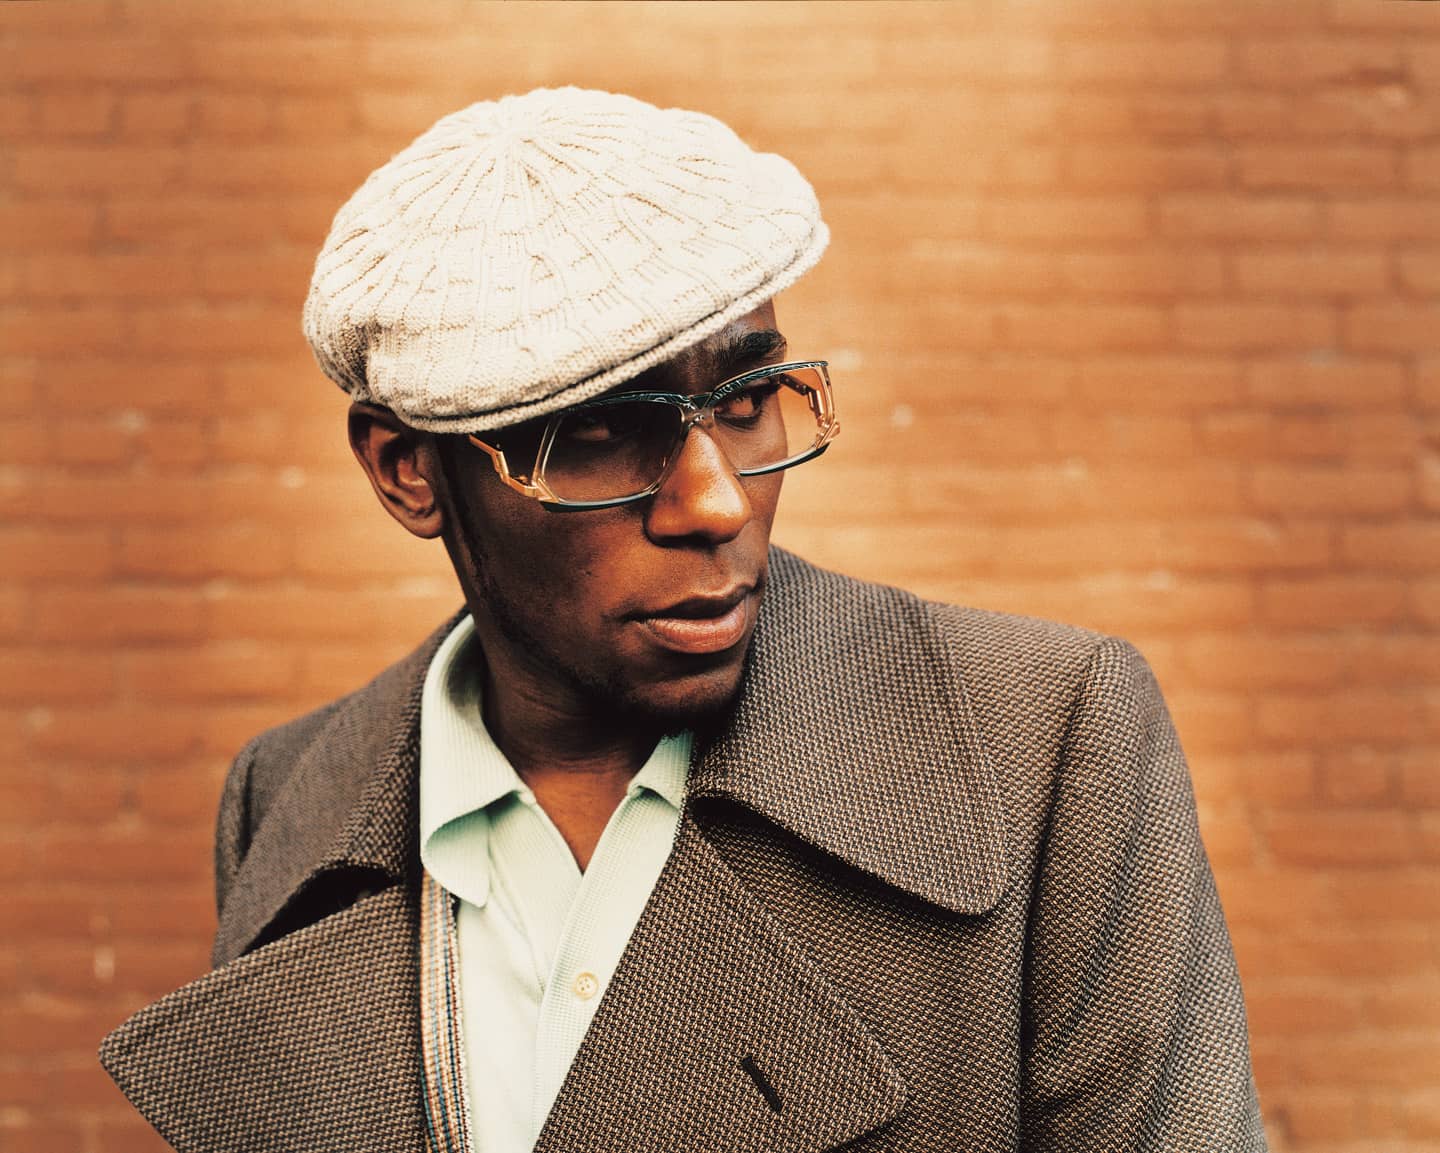 Mos Def wearing a brown coat and a hat